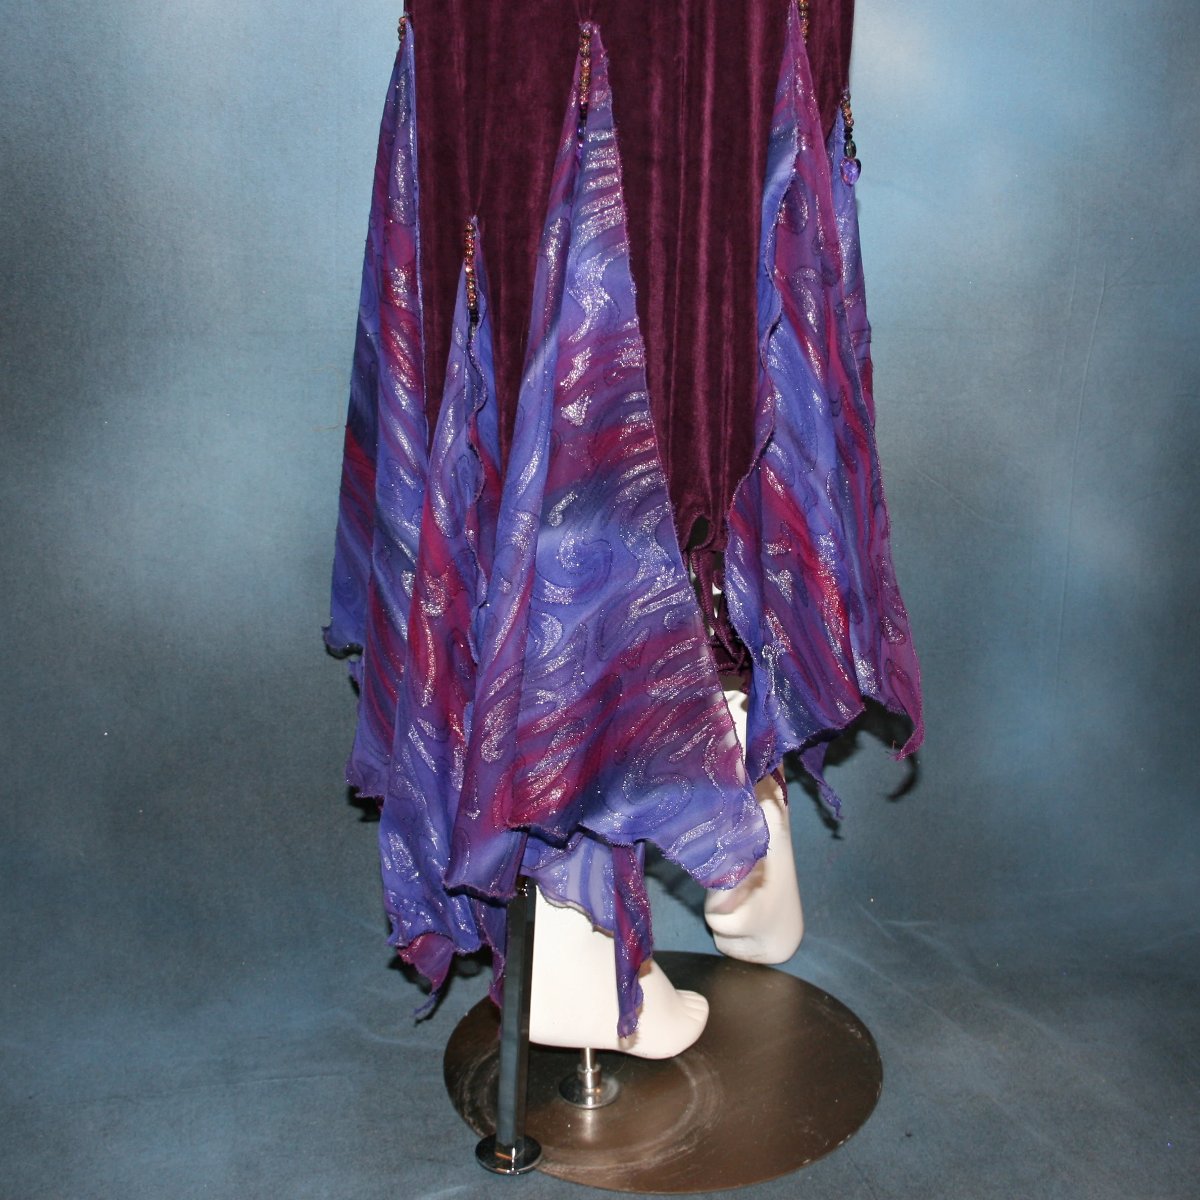 lower view of Social ballroom dance dress created in luxurious wine solid slinky fabric with flounces of deep scarlette & wine printed & dazzling chiffon, with Swarovski hand beading. A great social dress for any ballroom dance or special occasion, as well as a great beginner ballroom dance show dress!  